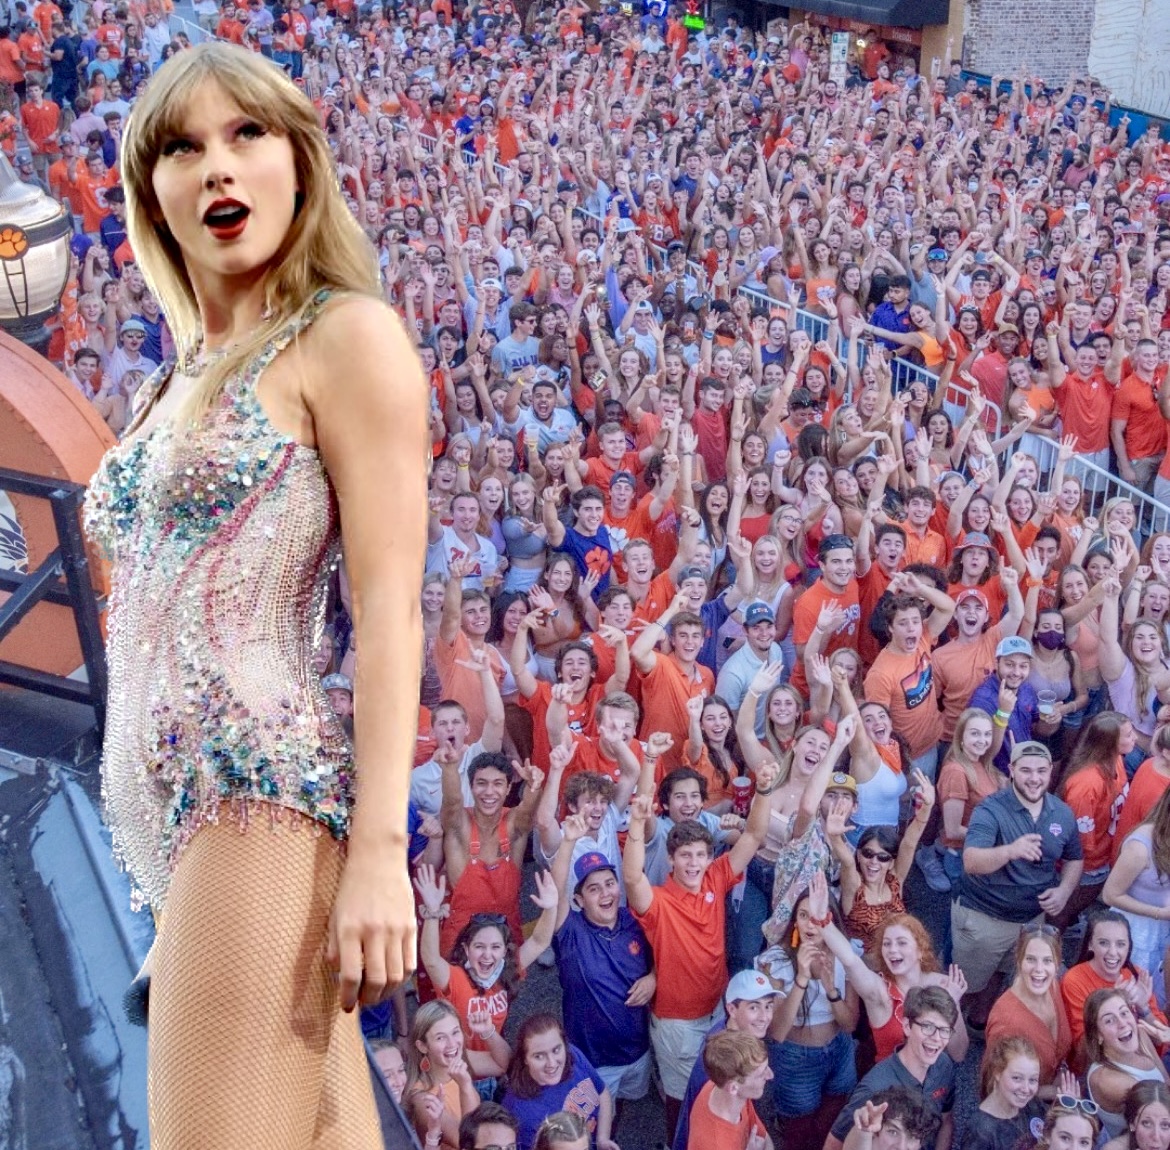 Swifties%2C+get+ready+for+your+supreme+leader+to+come+to+Clemson+to+perform.+